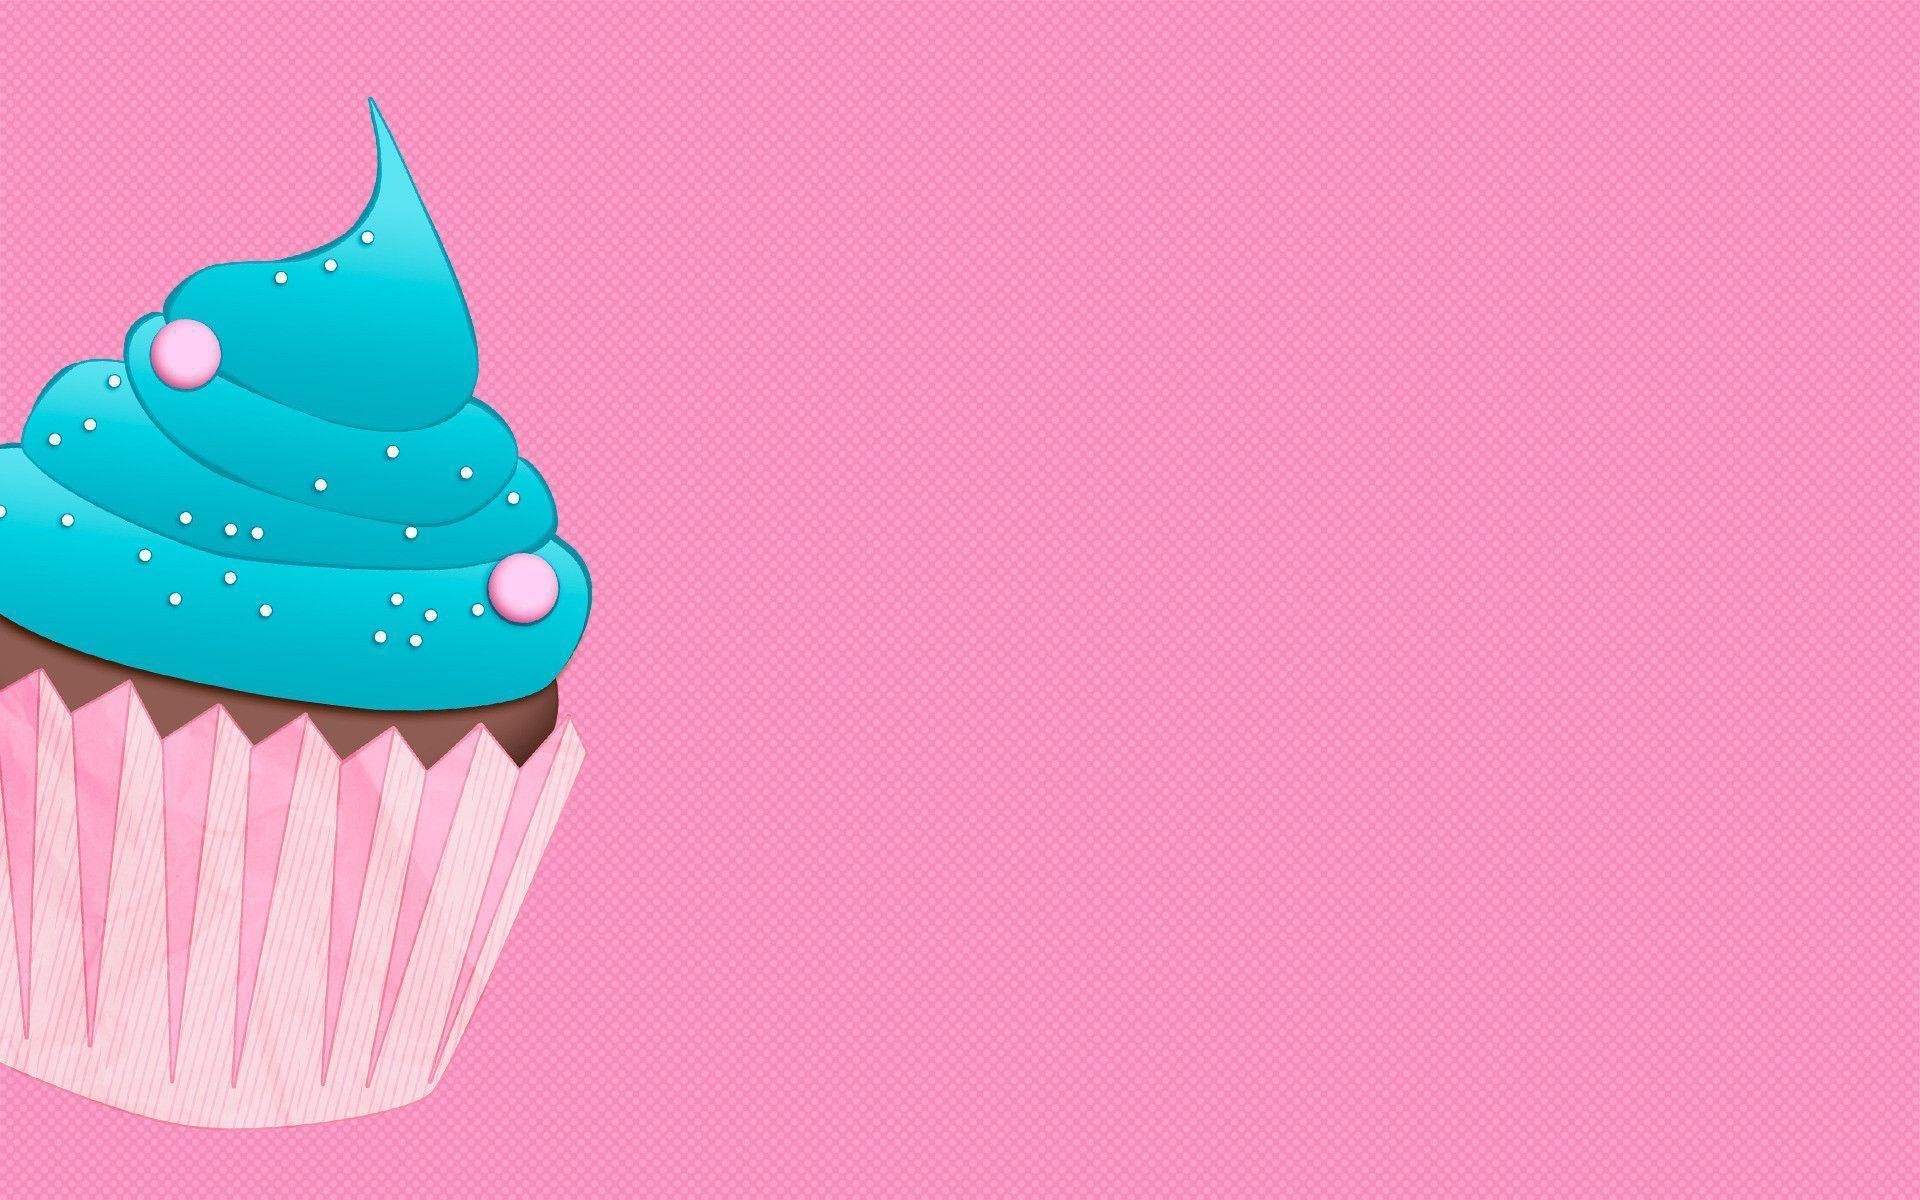 1920x1200 Cute animated cupcakes wallpaper - photo#13